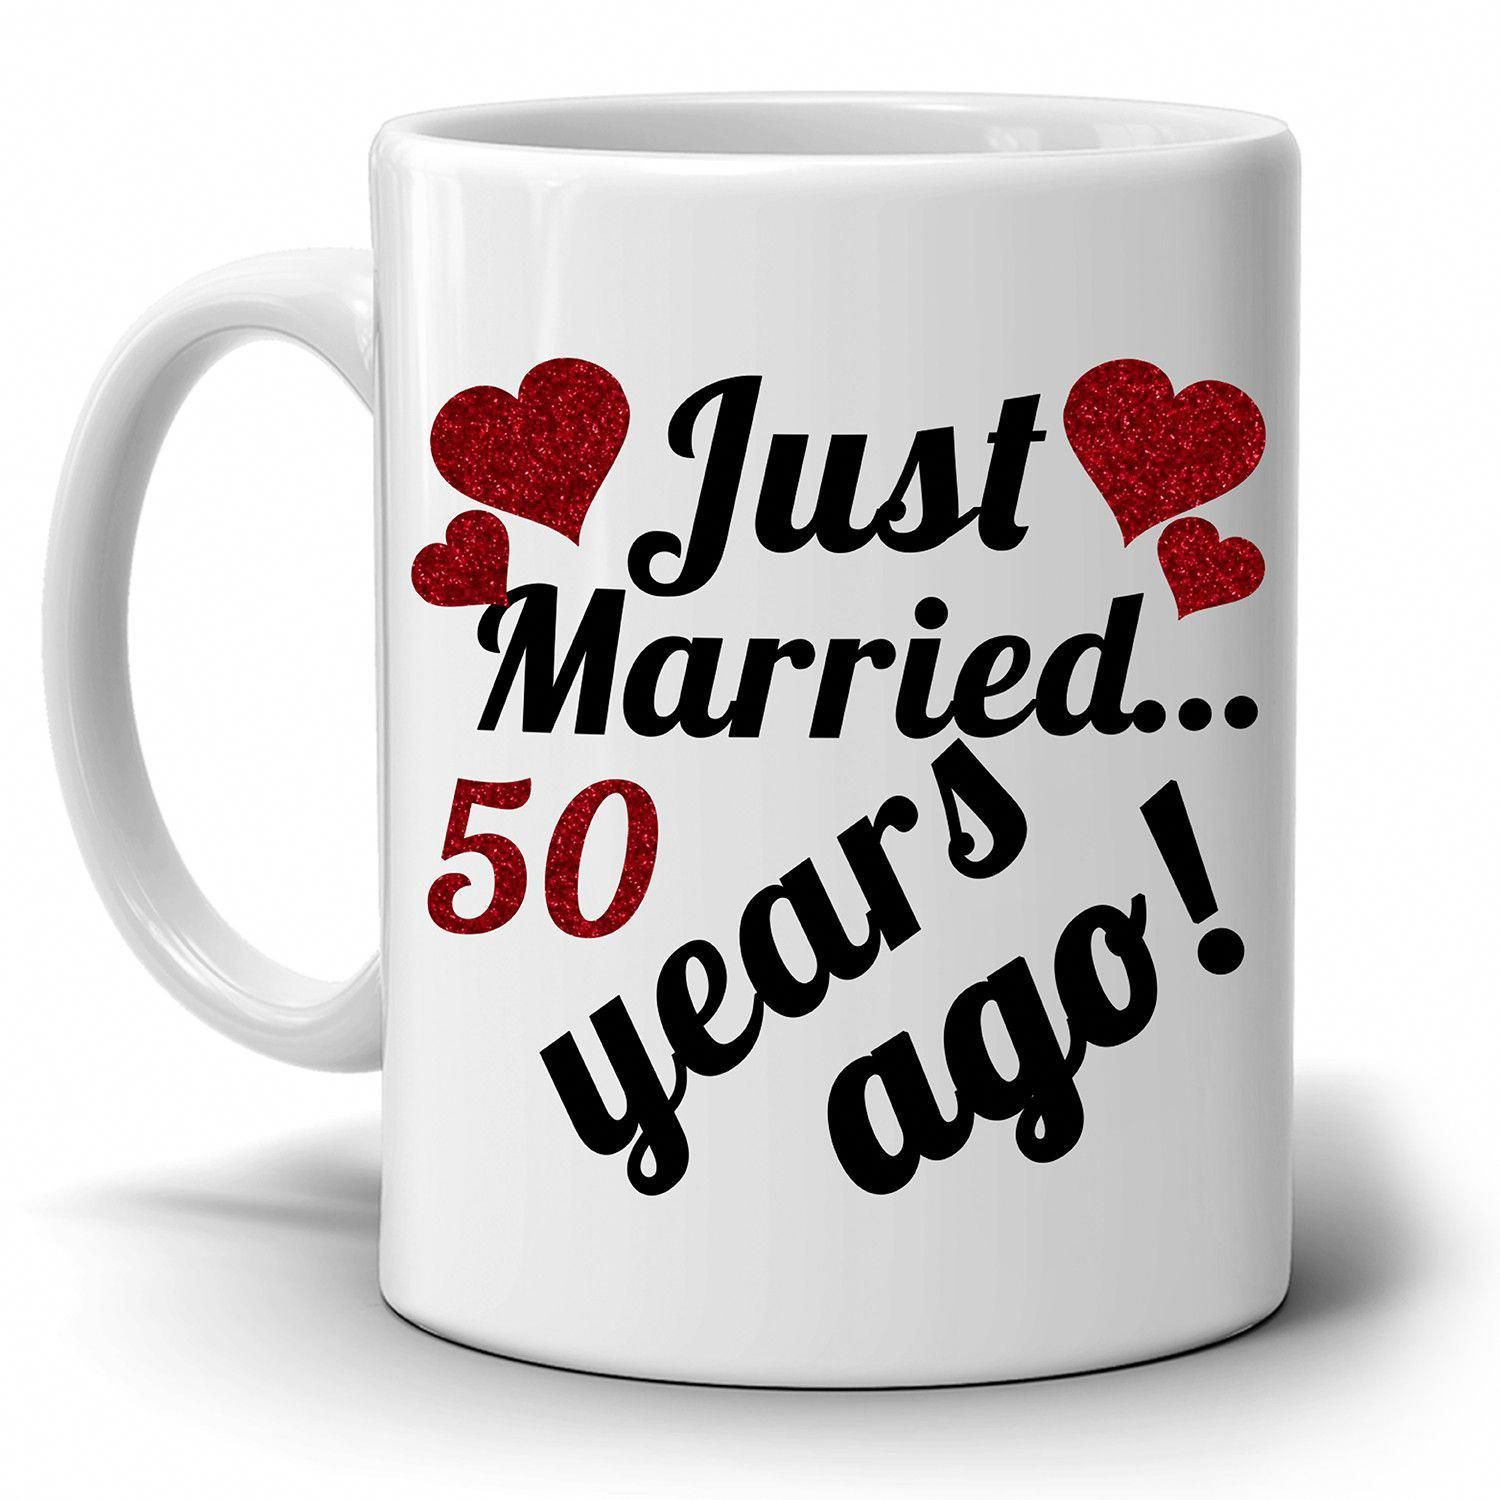 Christmas Gift Ideas For Young Married Couples
 coffeemugs